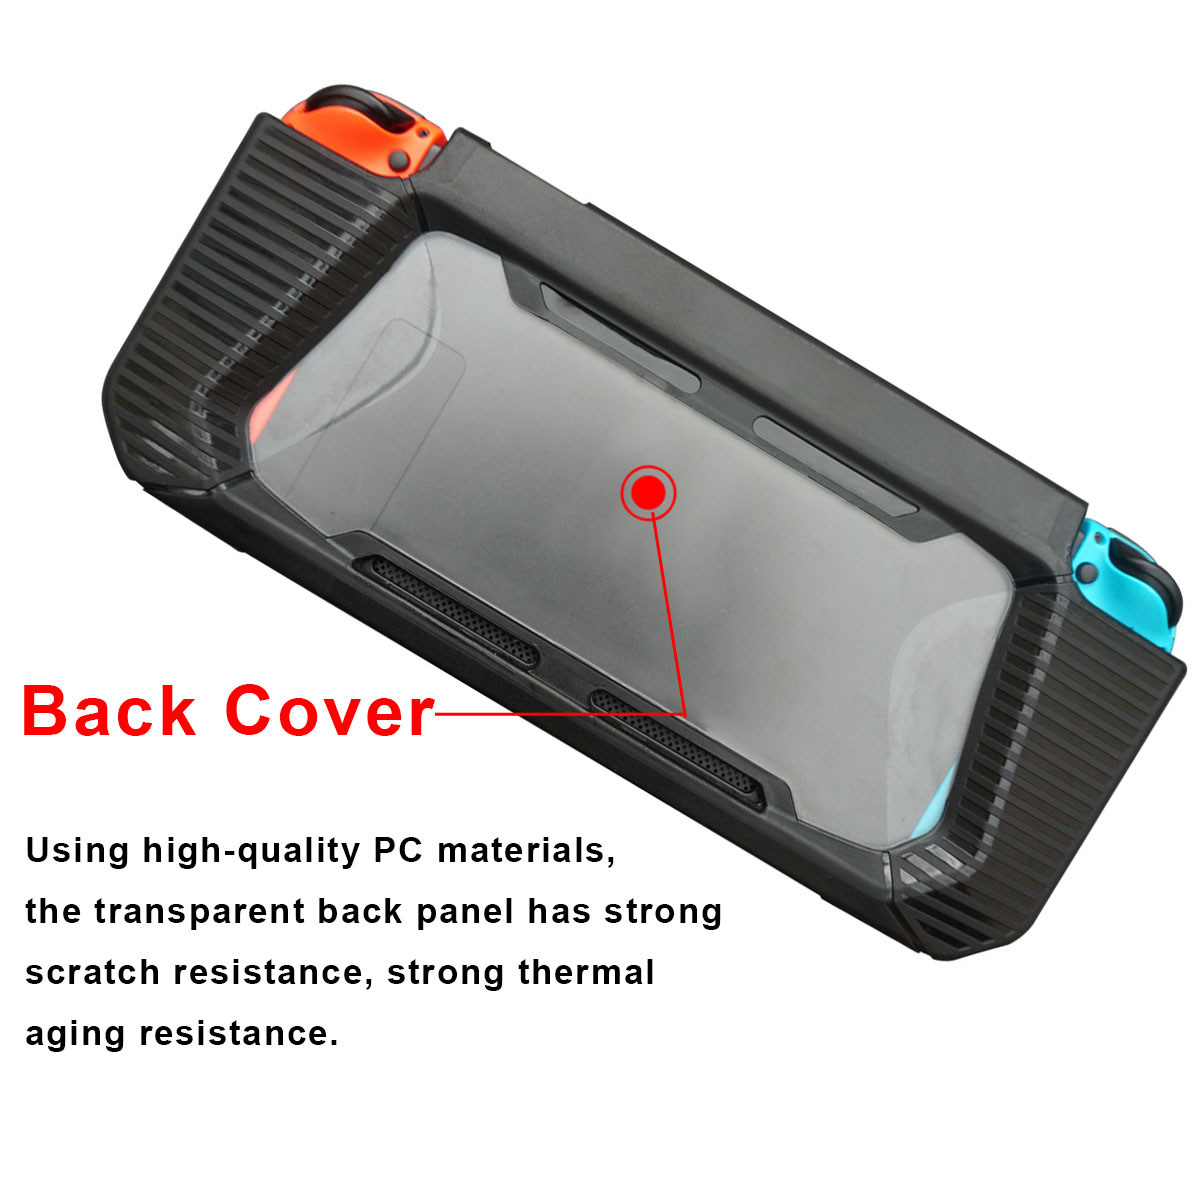 Backboard-Radiator-Hard-Cover-Shell-Hybrid-Protective-Case-For-Nintendo-Switch-Game-Console-1454633-5